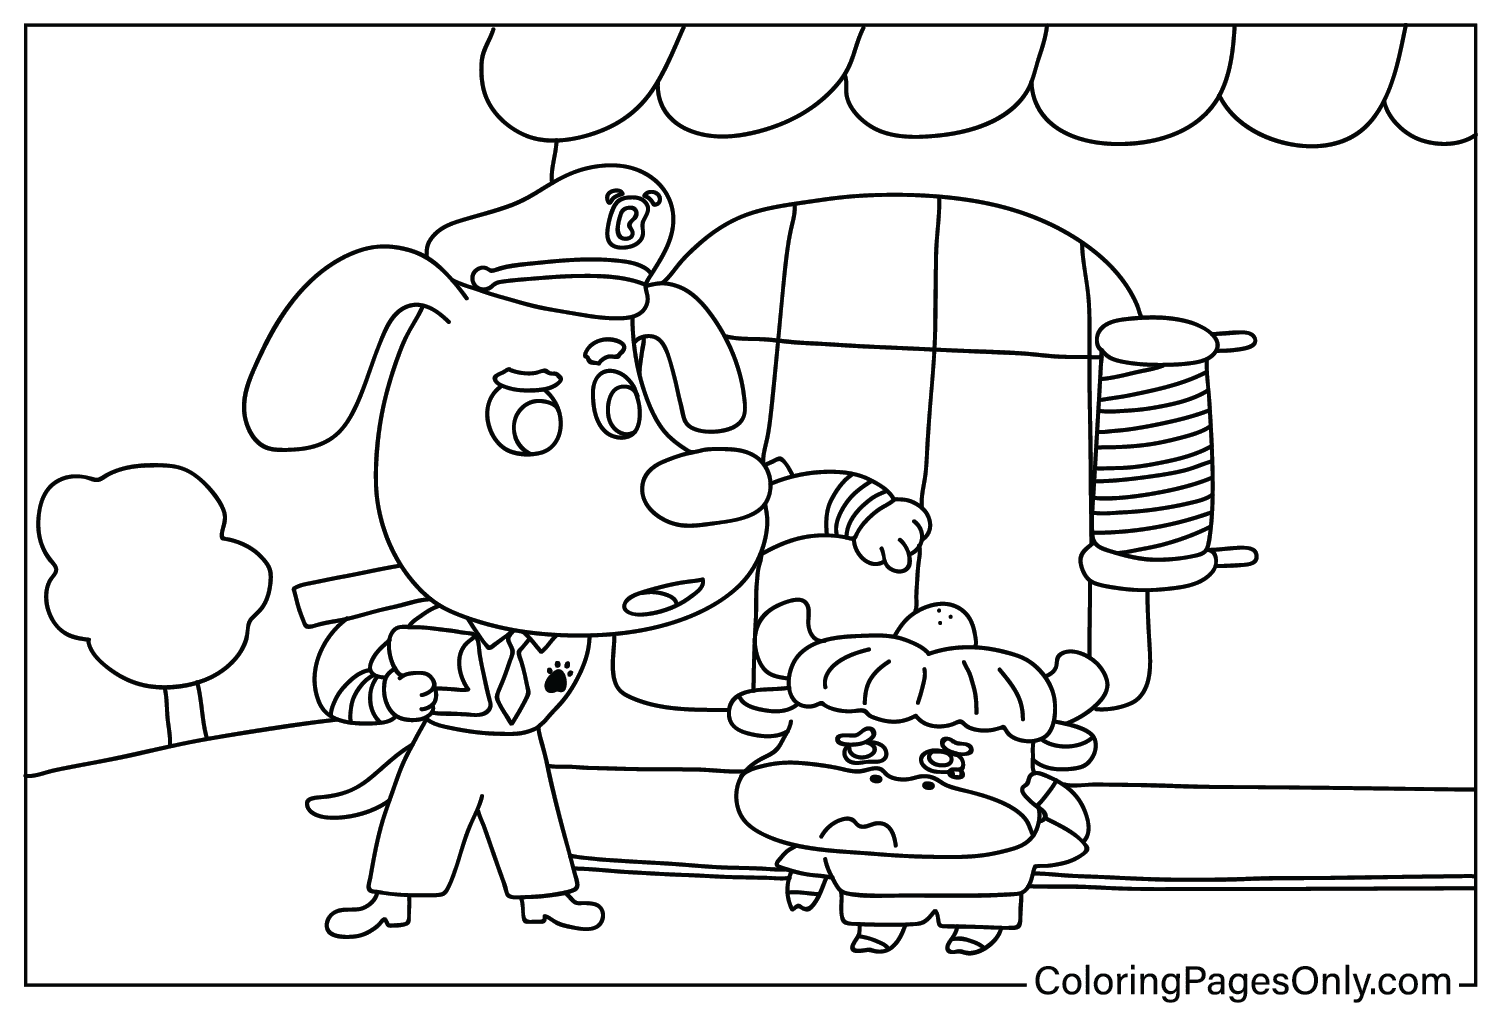 Safety Sheriff Labrador Coloring Page PNG from Safety Sheriff Labrador